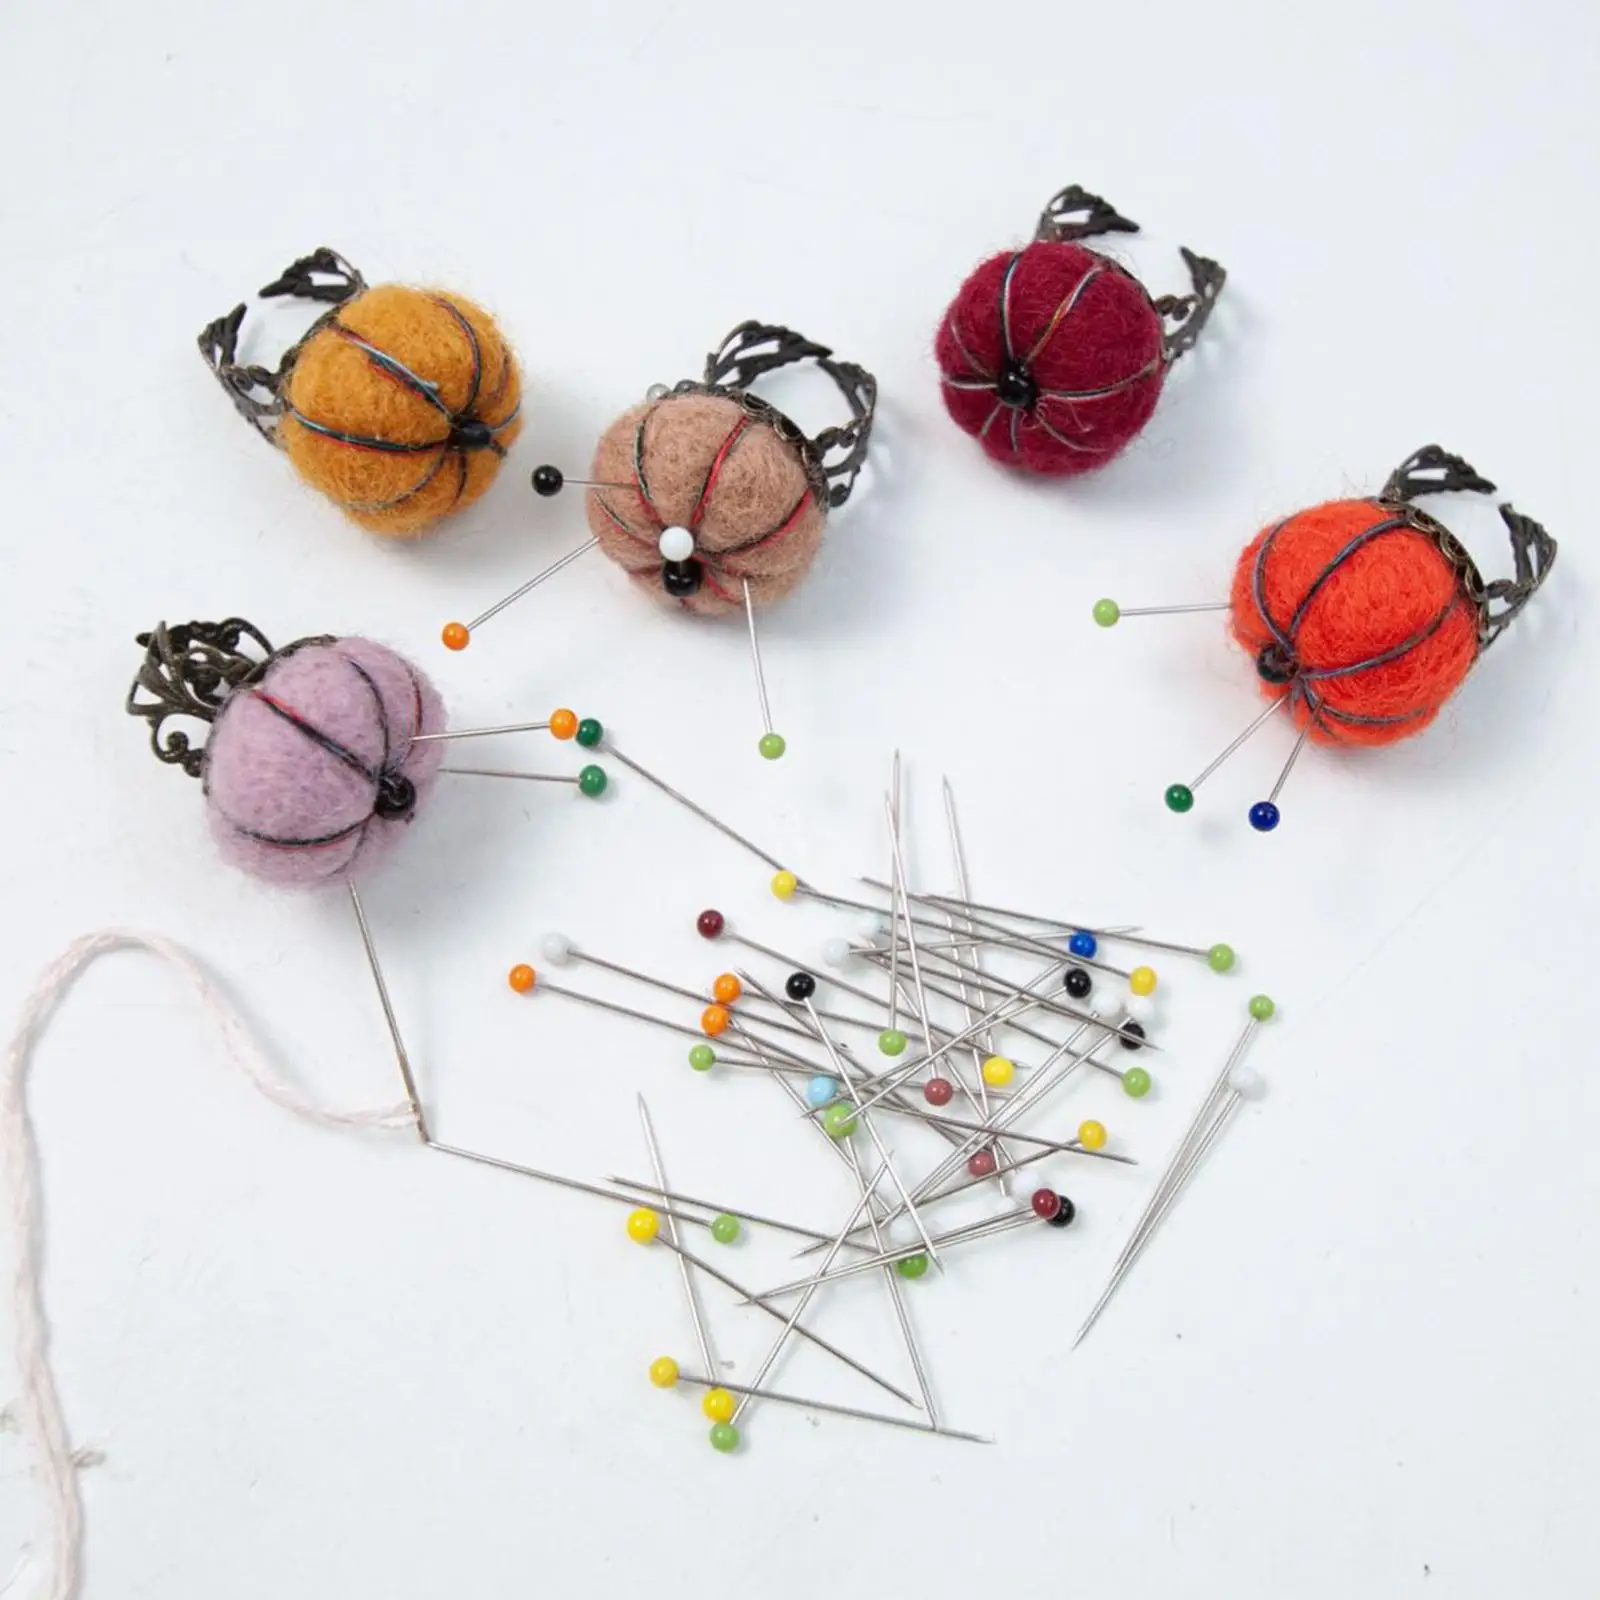 5Pcs Felt Pin Cushion Kit Sewing Supply DIY Crafts Handcraft Handmade Needlework Pumpkin Shaped for Sewing Quilting Accessories